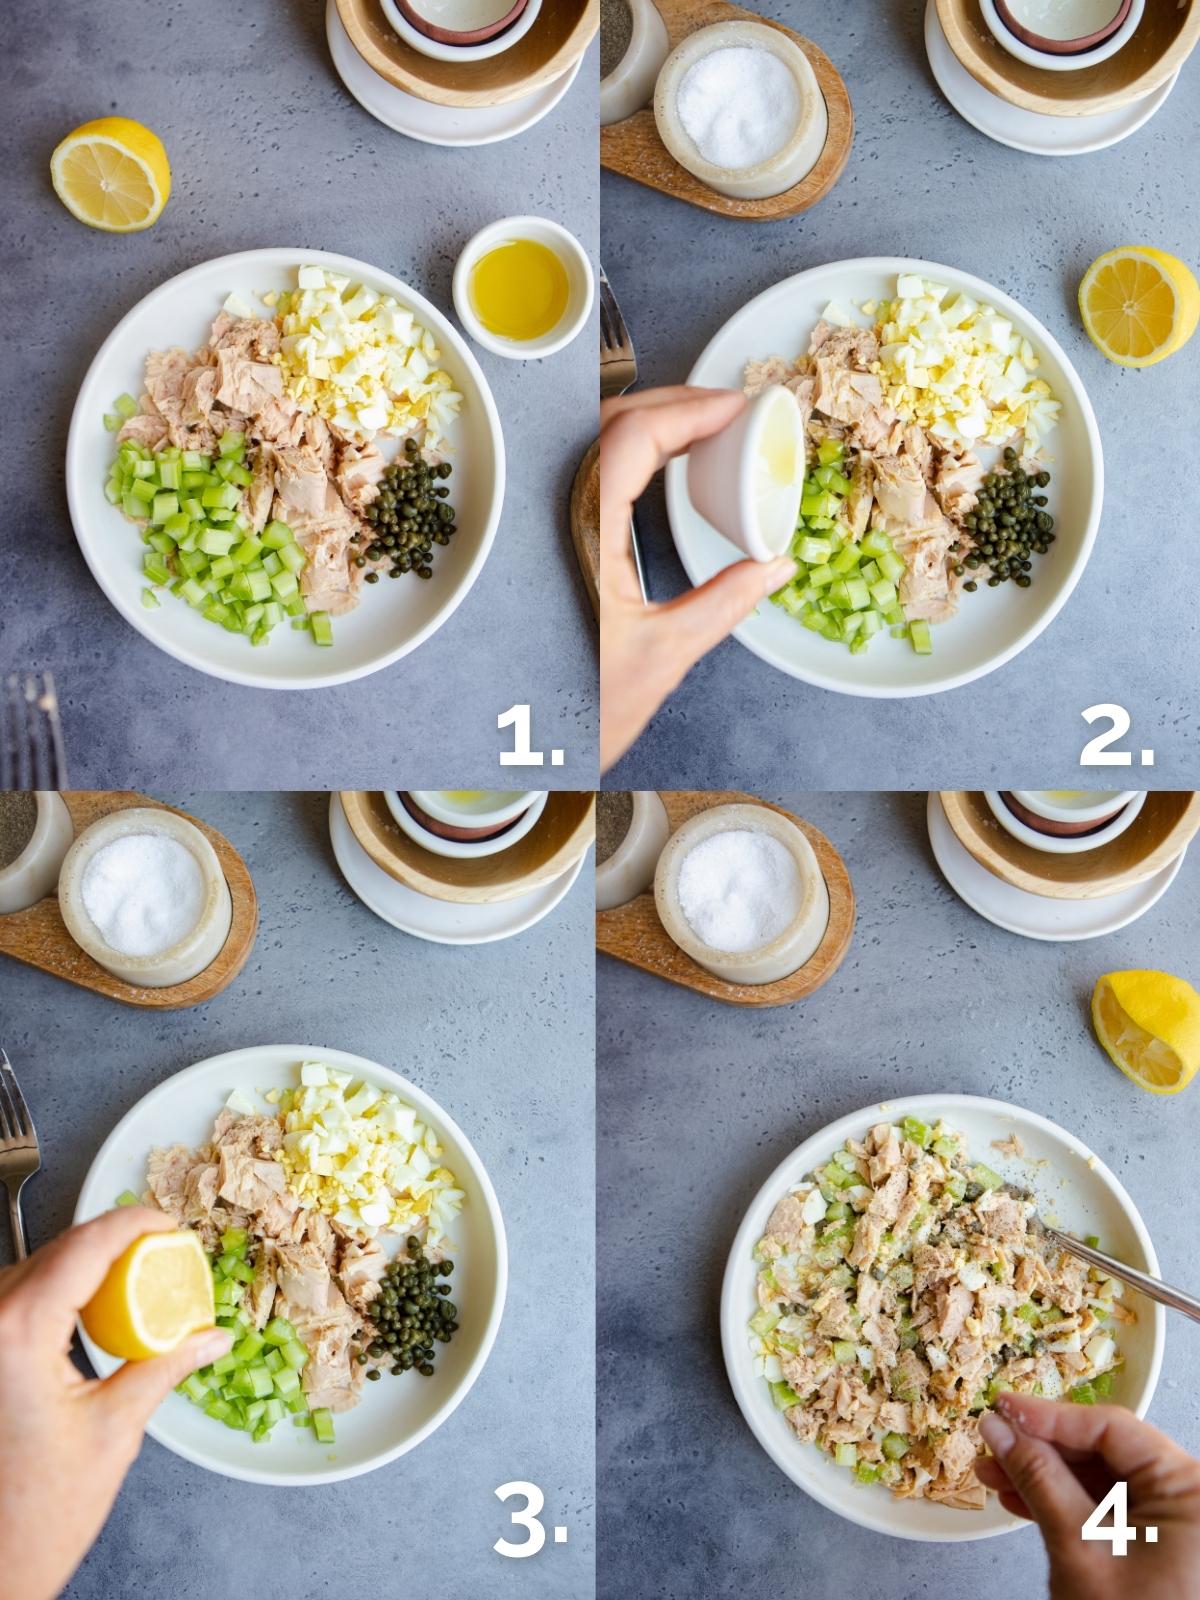 step-by-step pictures of woman making tuna salad with olive oil and lemon juice instead of mayonnaise 